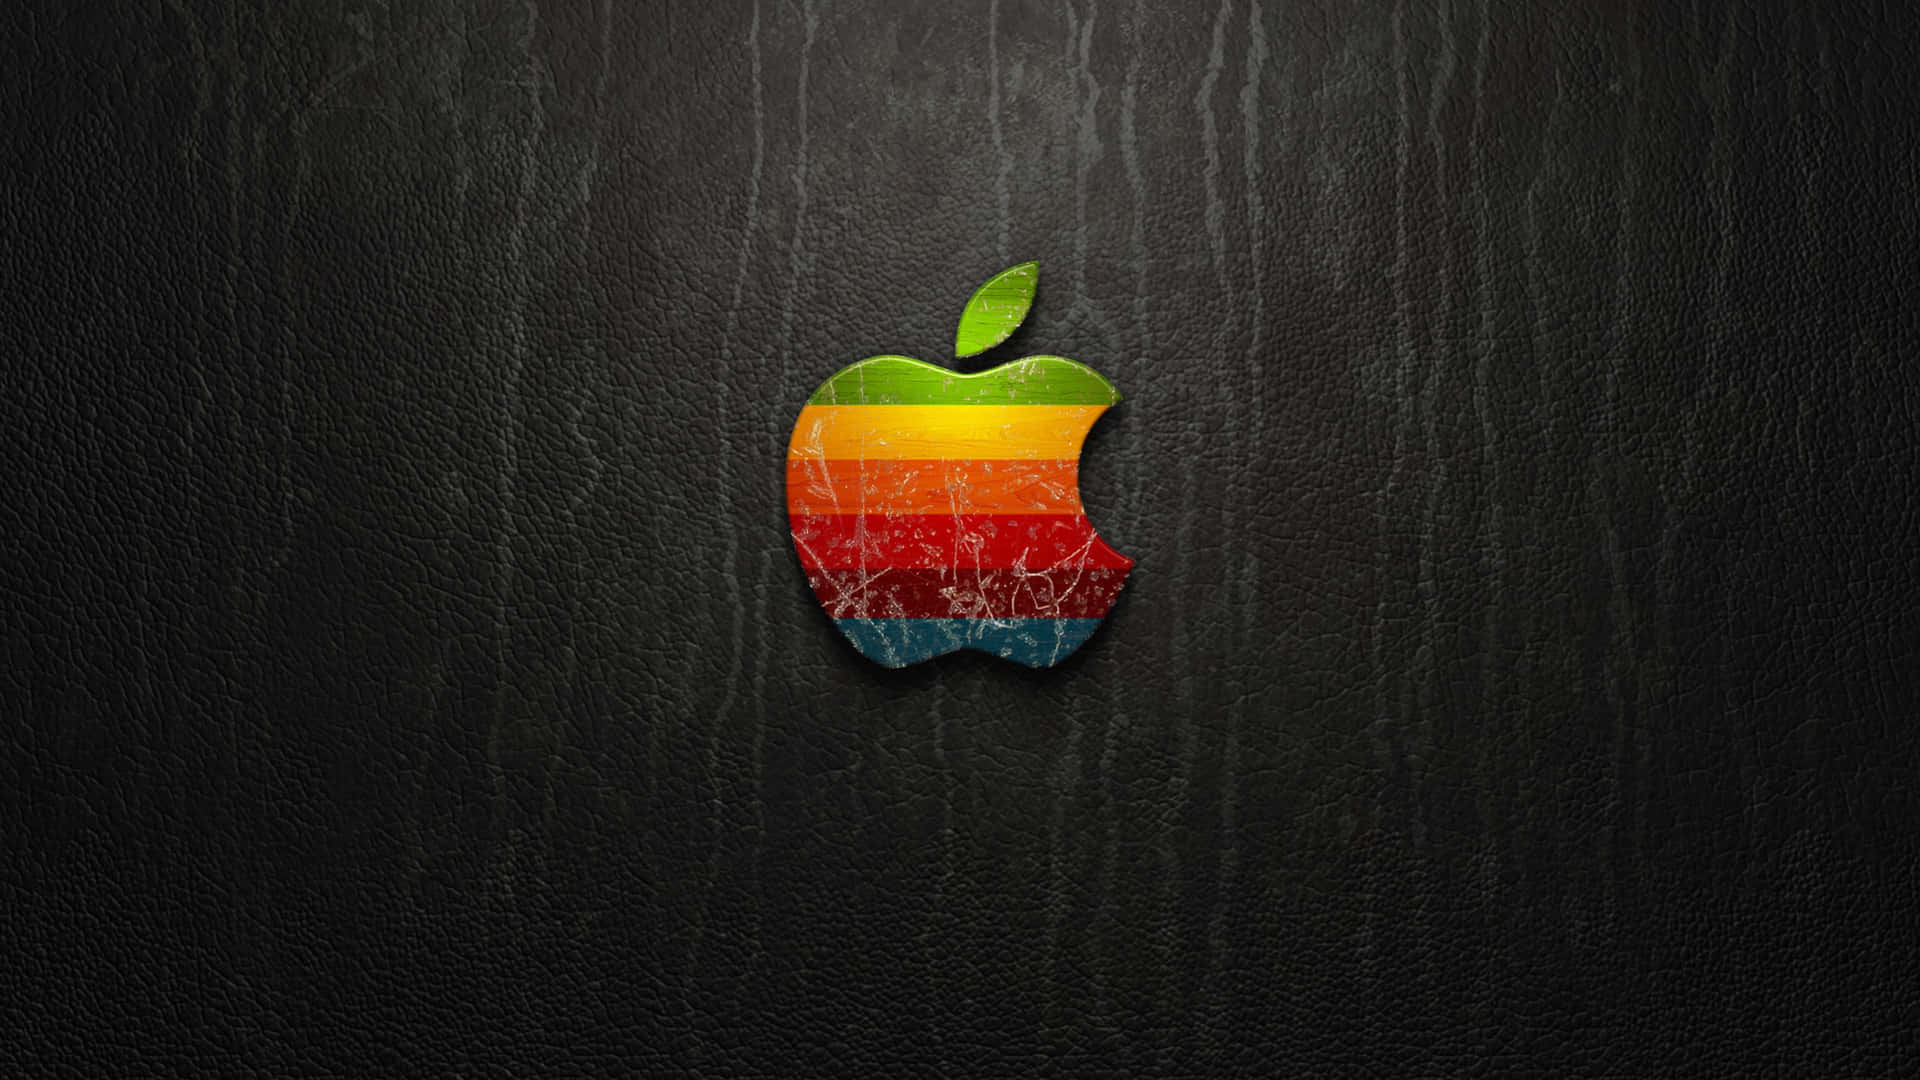 Download Enjoy this beautiful 4k Apple background | Wallpapers.com